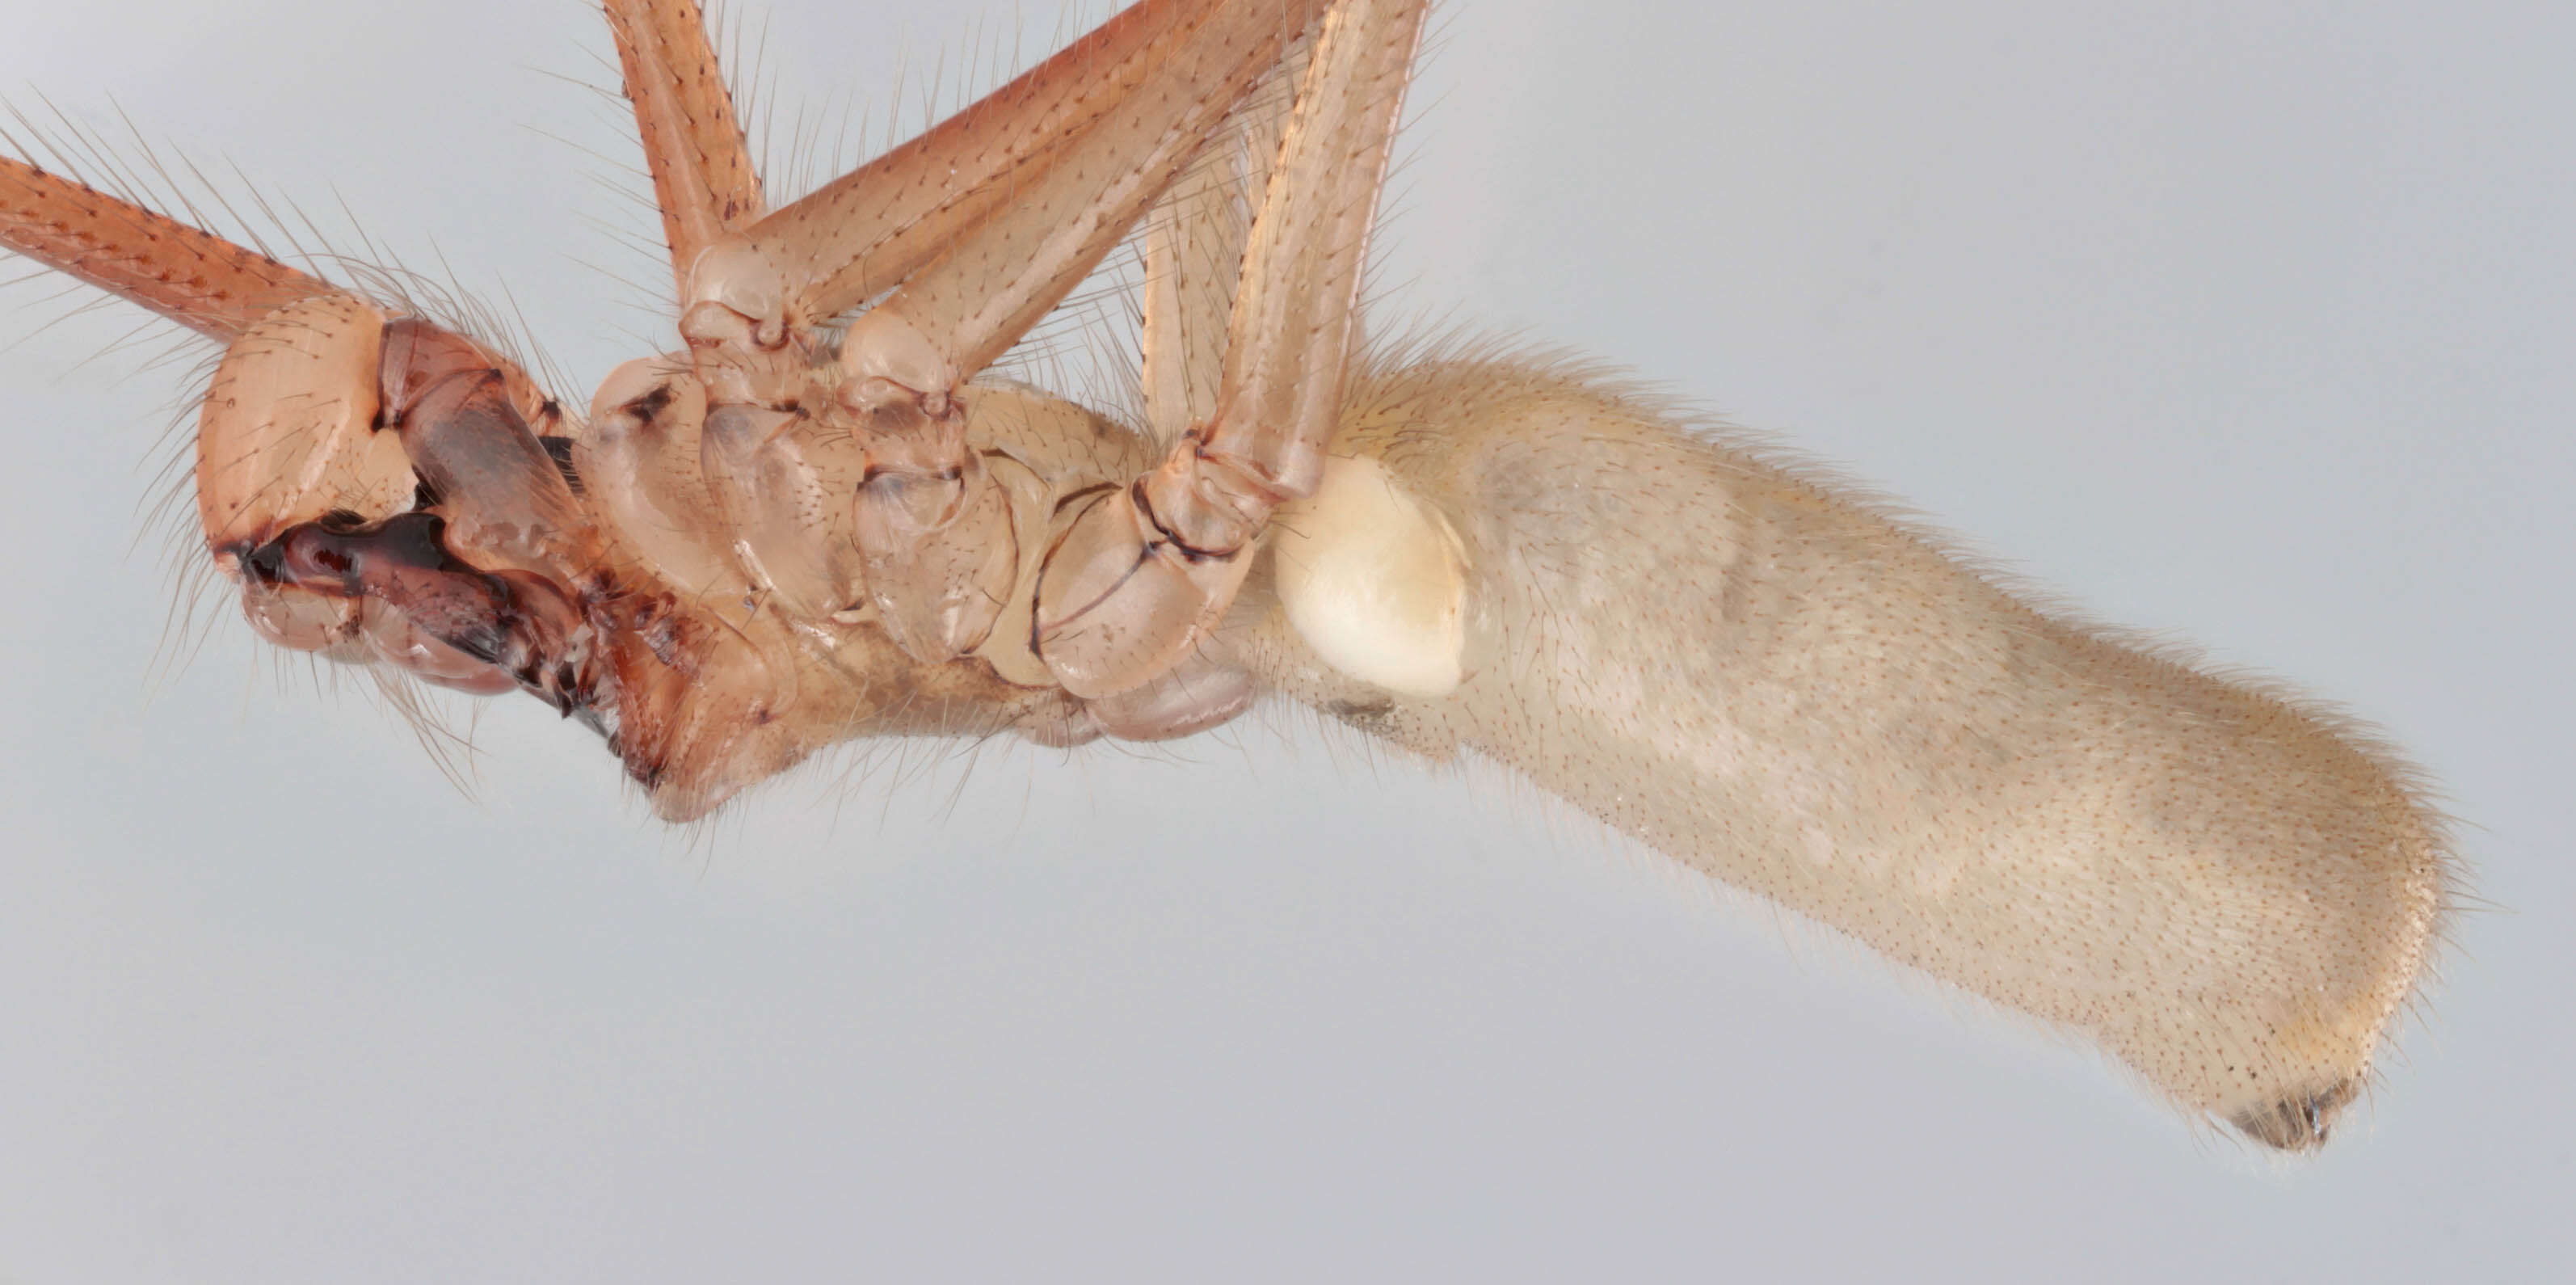 Image of Long-bodied Cellar Spider